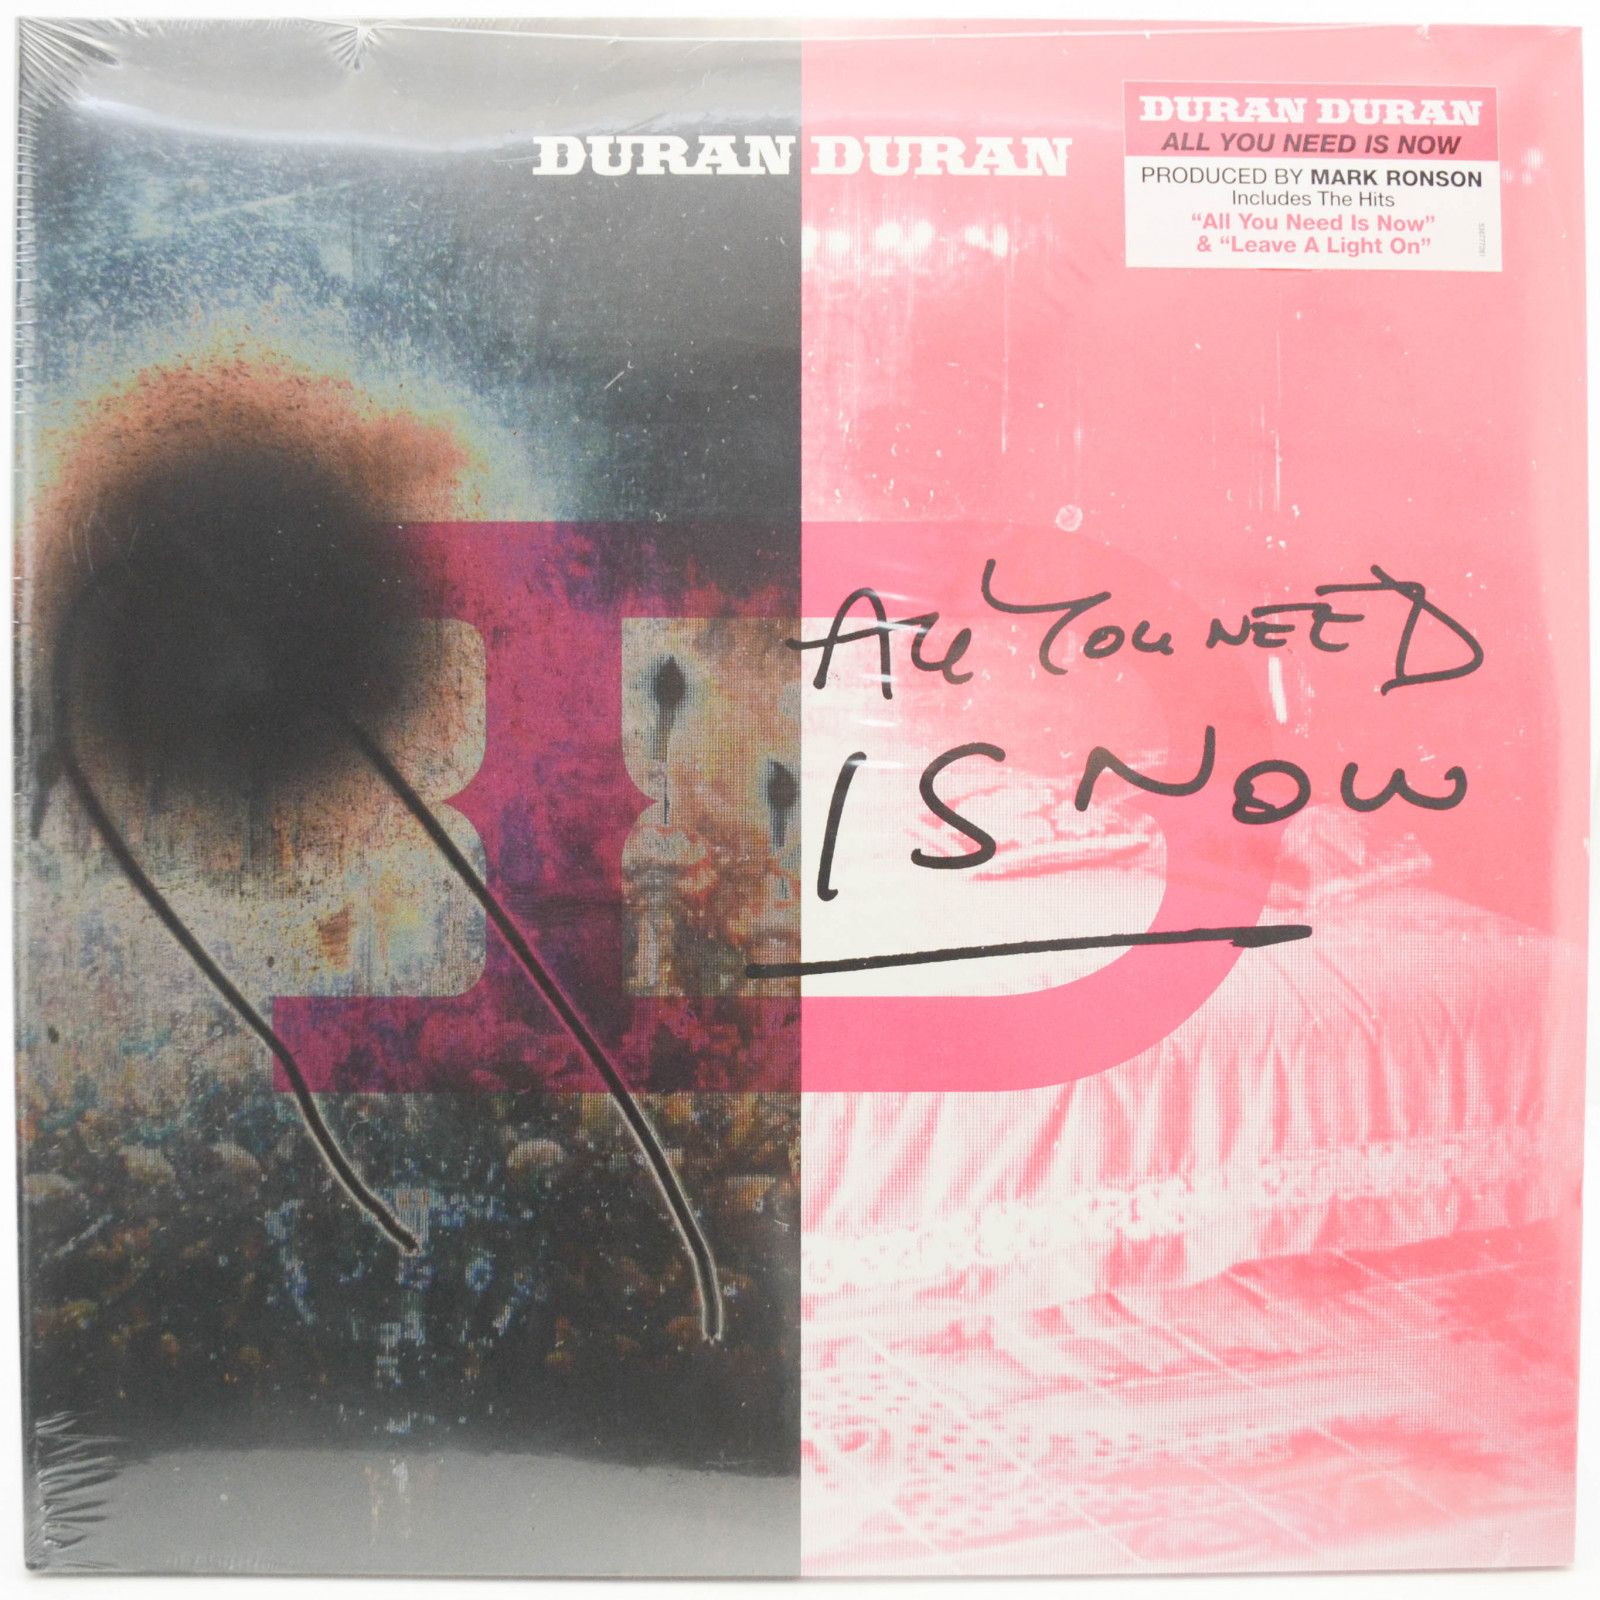 Duran Duran — All You Need Is Now (2LP), 2010